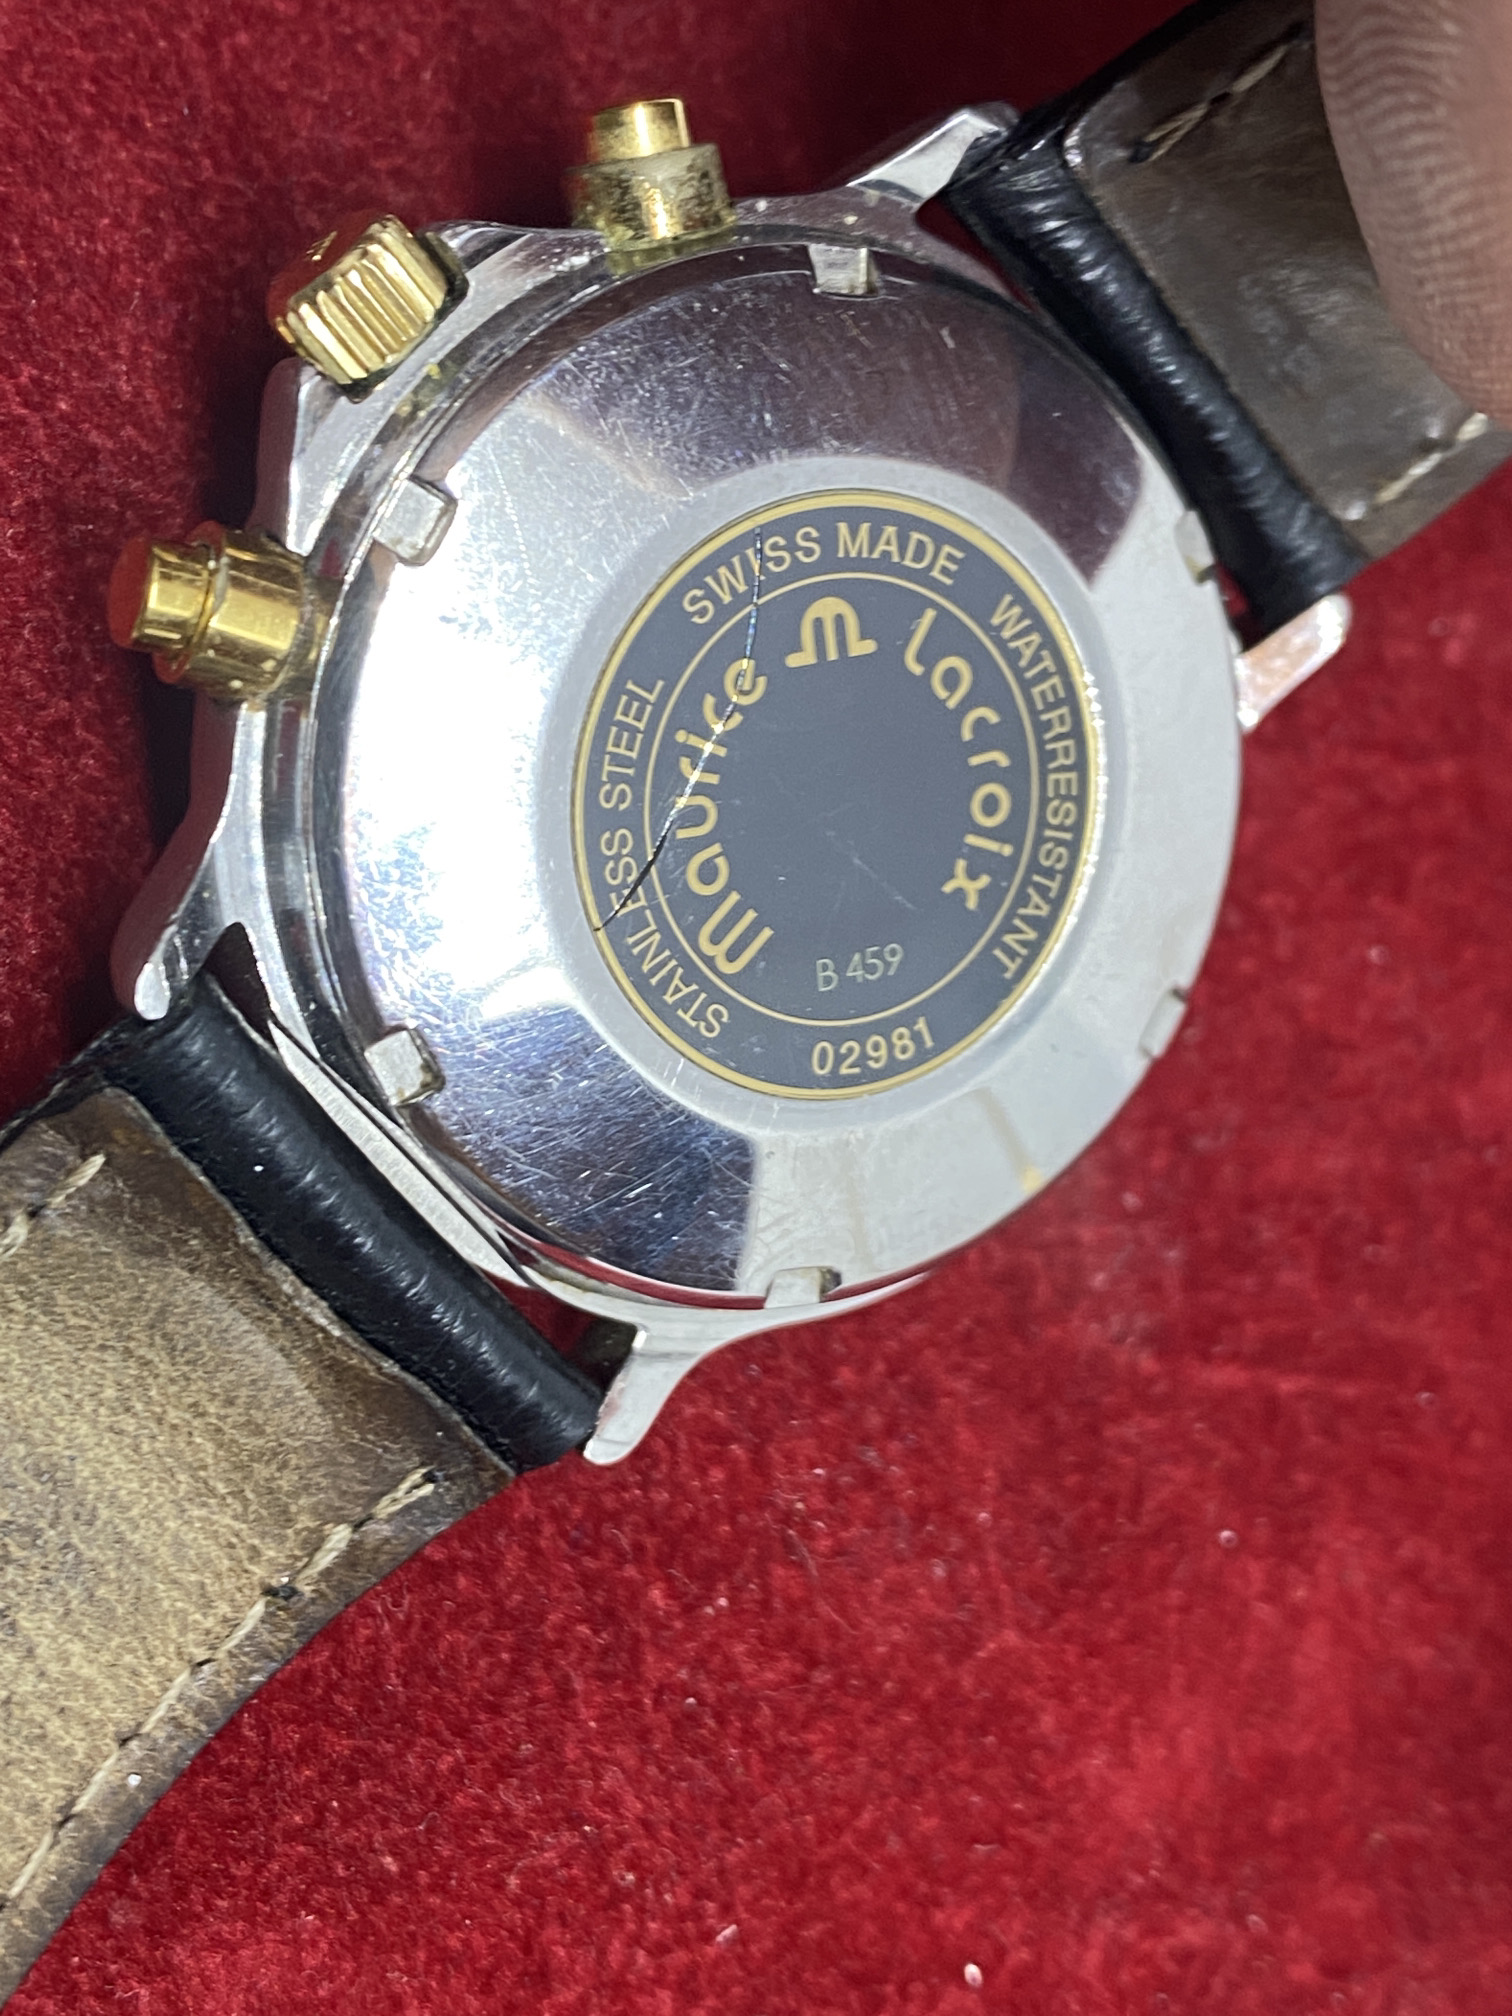 MAURICE LACROIX MOONPHASE, PERPETUAL CALENDAR WATCH WITH PAPERS - Image 7 of 8